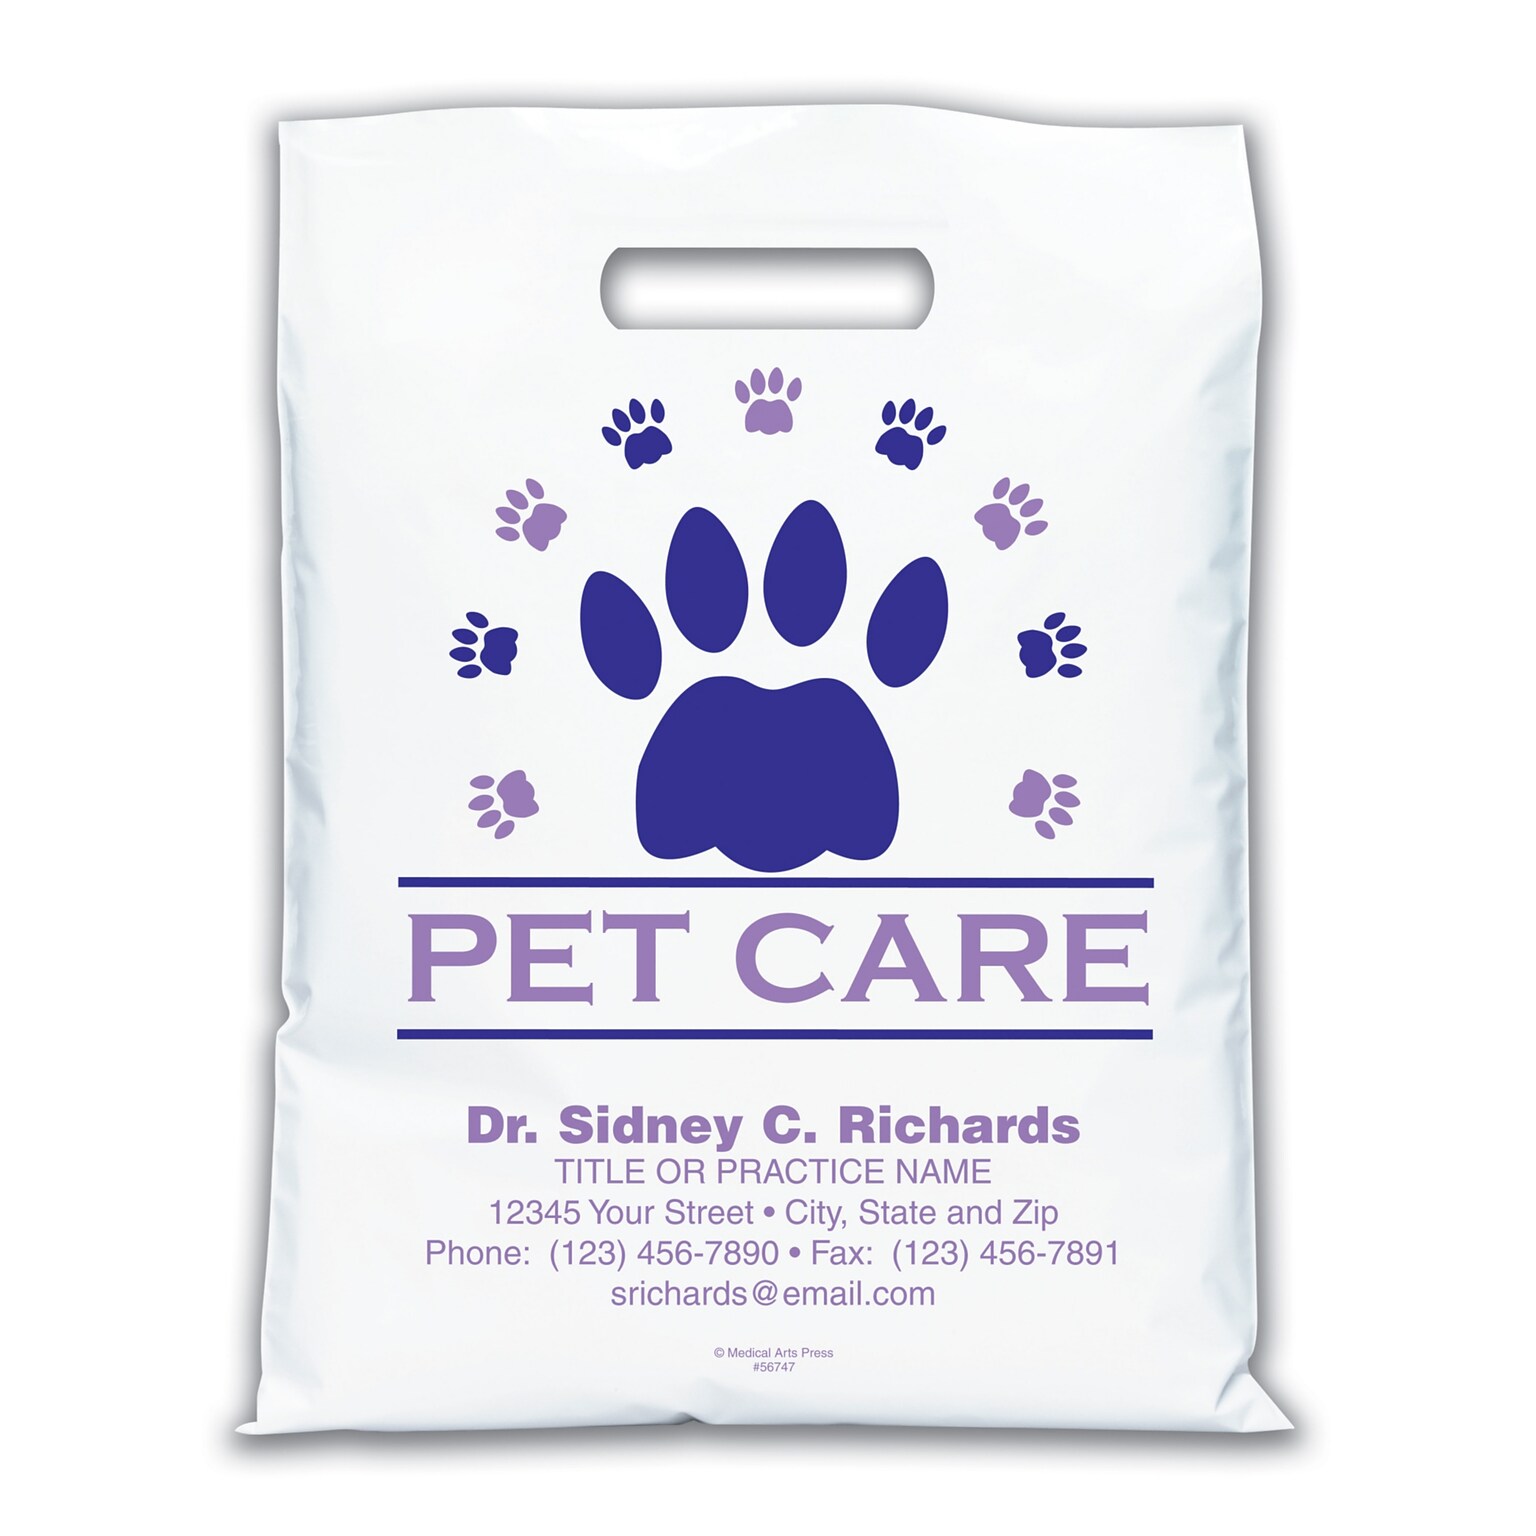 Medical Arts Press® Veterinary Personalized Large 2-Color Supply Bags; 9 x 13, Paw Prints, Pet Care, 100 Bags, (56747)